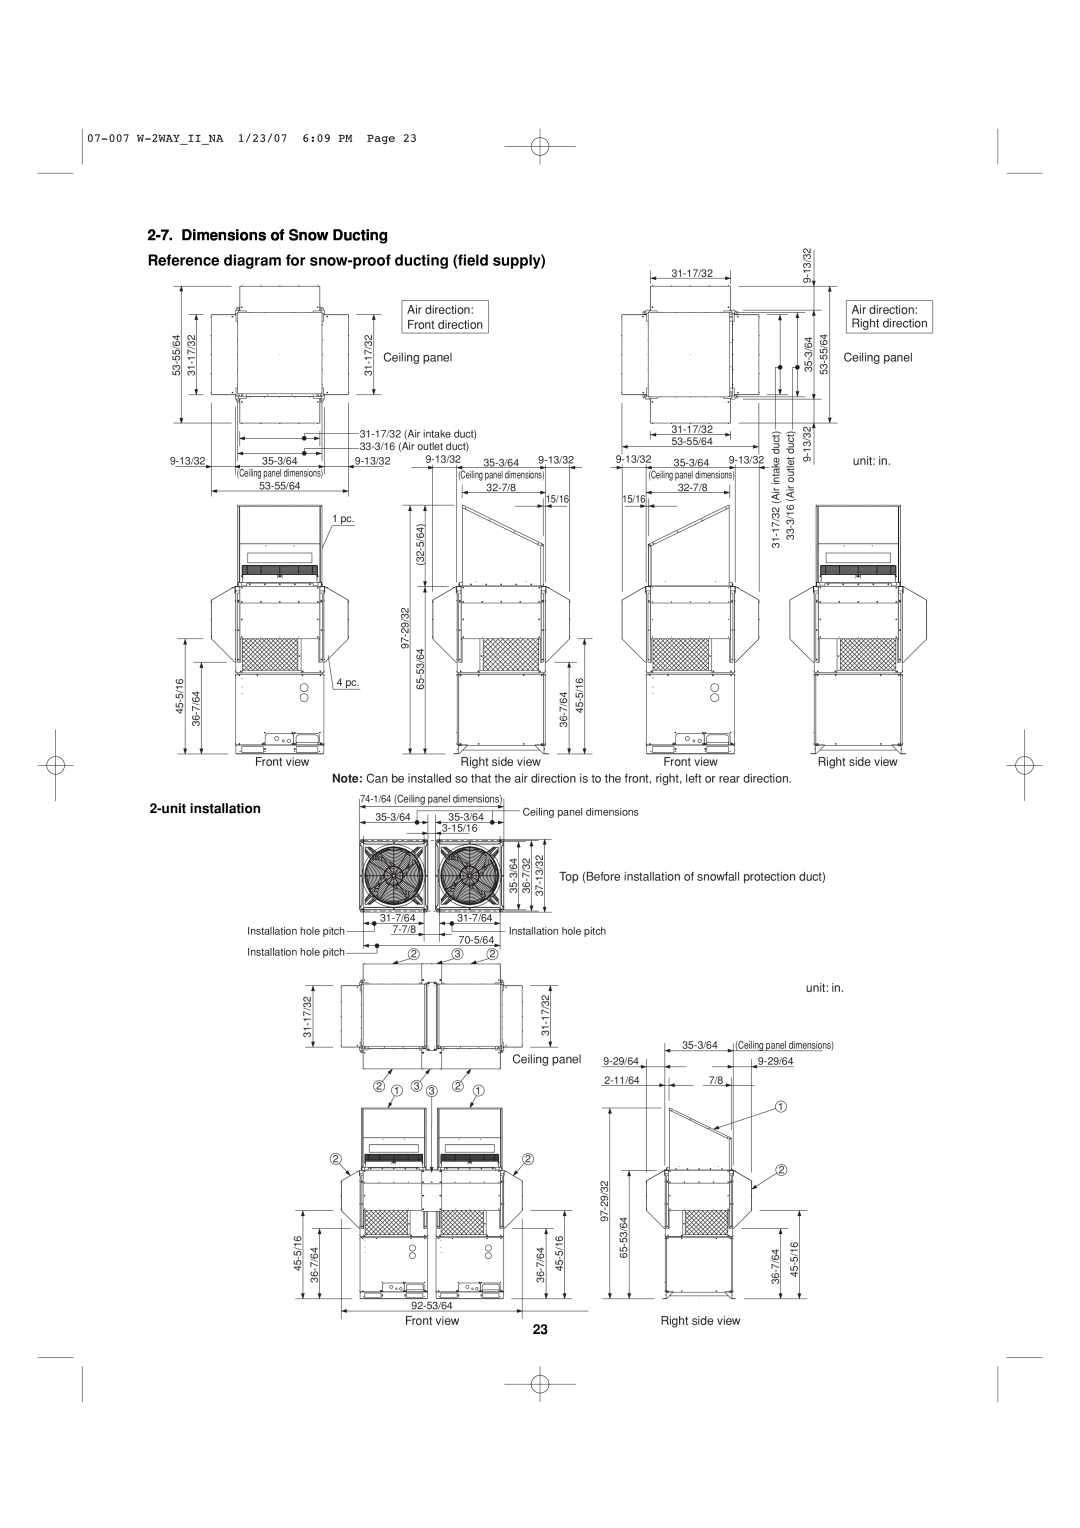 Sanyo 85464359982001 installation instructions Dimensions of Snow Ducting 